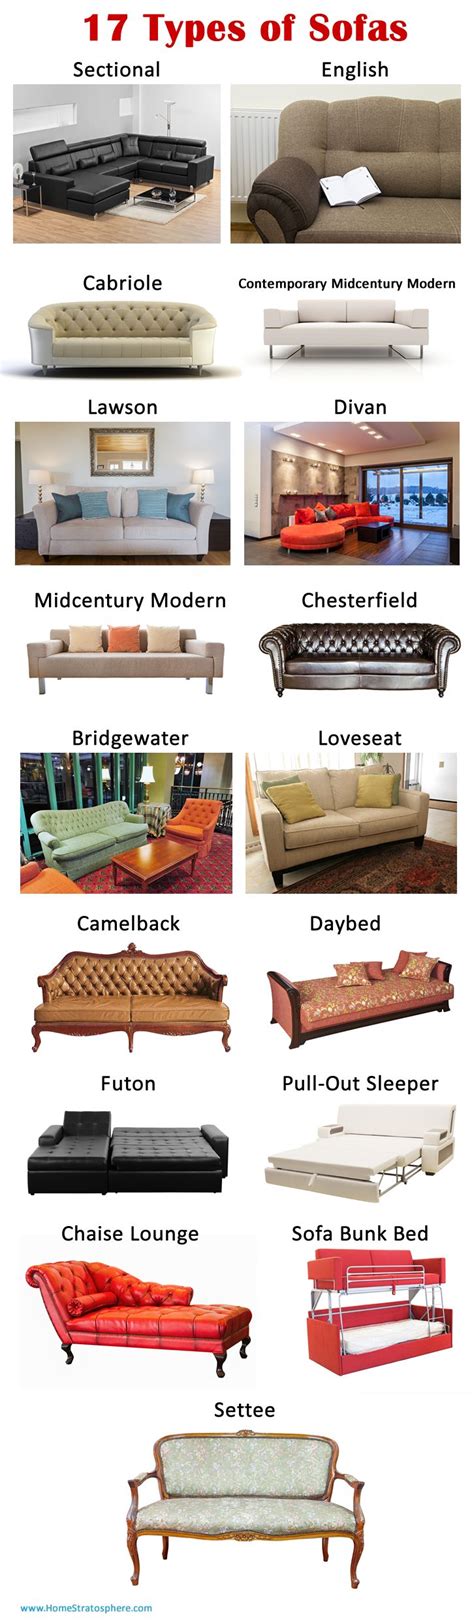 24 Styles Of Sofas And Couches Explained 2022 Buyers Guide Types